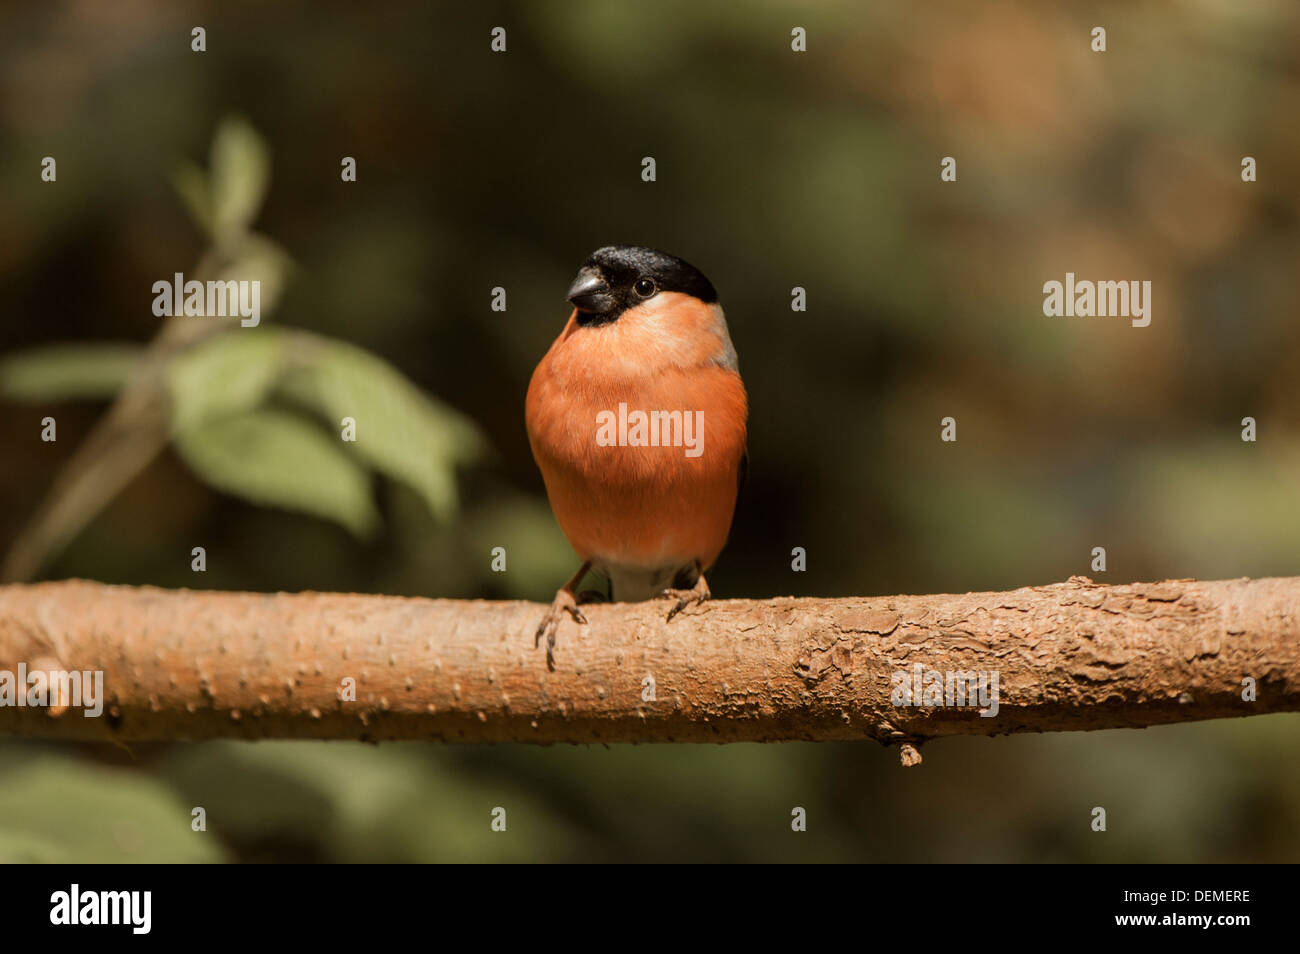 Male Bullfinch perched on branch. Stock Photo